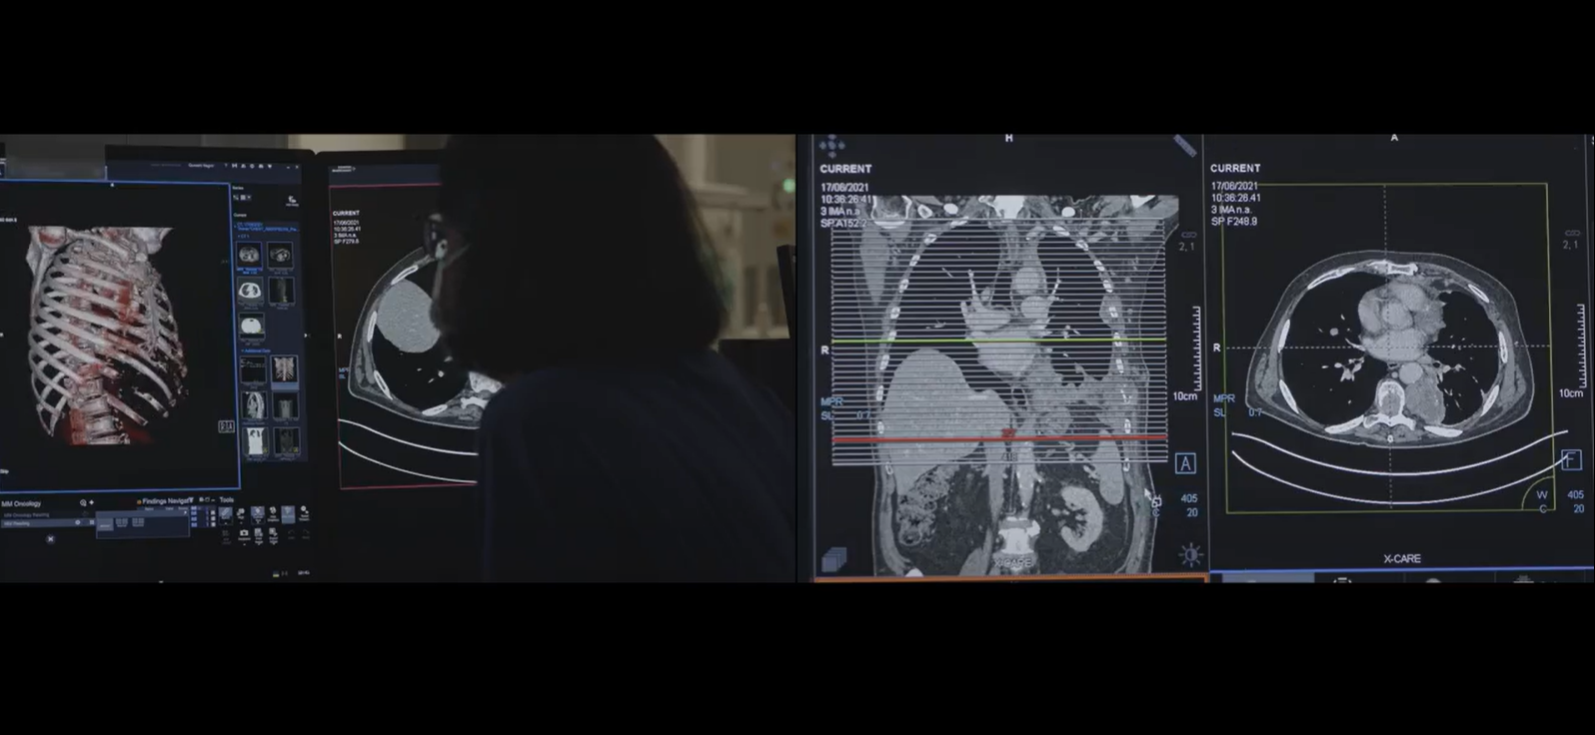 A clip from the film, showing CT scans of lungs on a computer screen